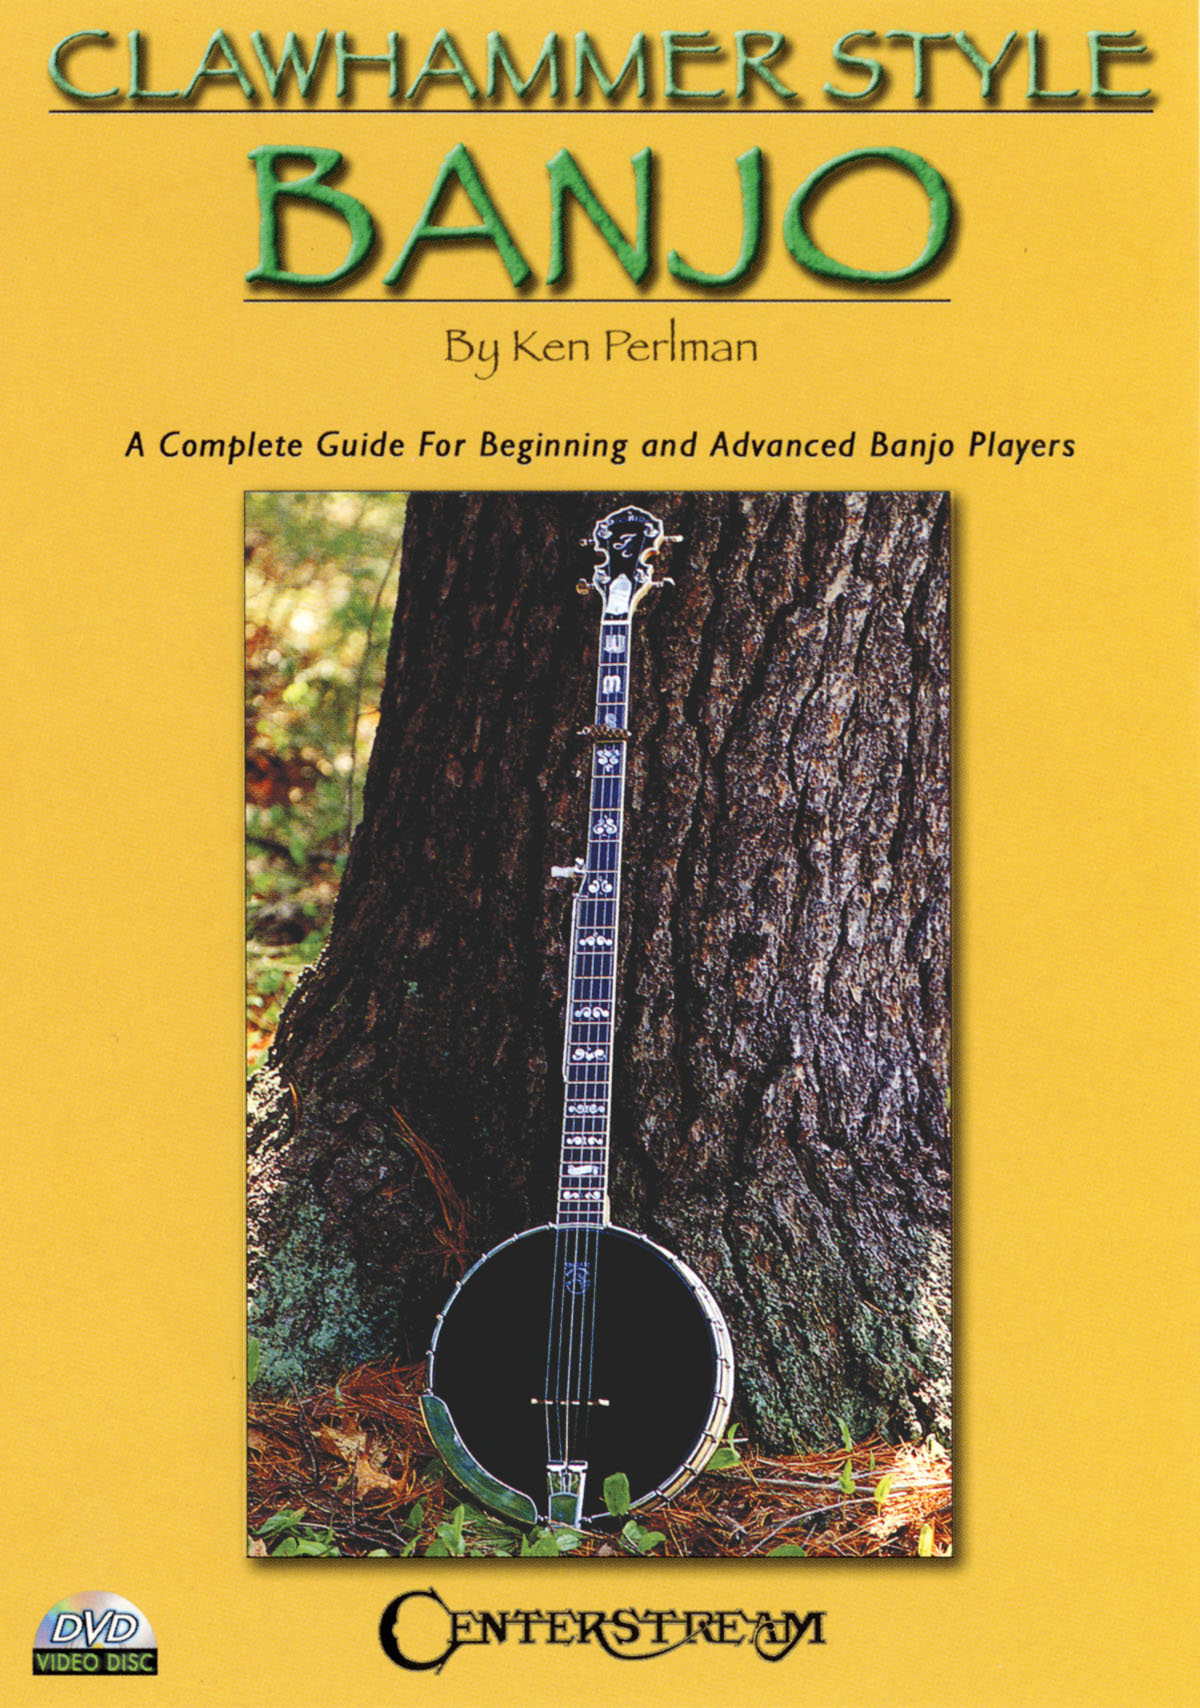 Clawhammer Style Banjo 2-DVD Set - A Complete Guide for Beginning and Advanced Banjo Players